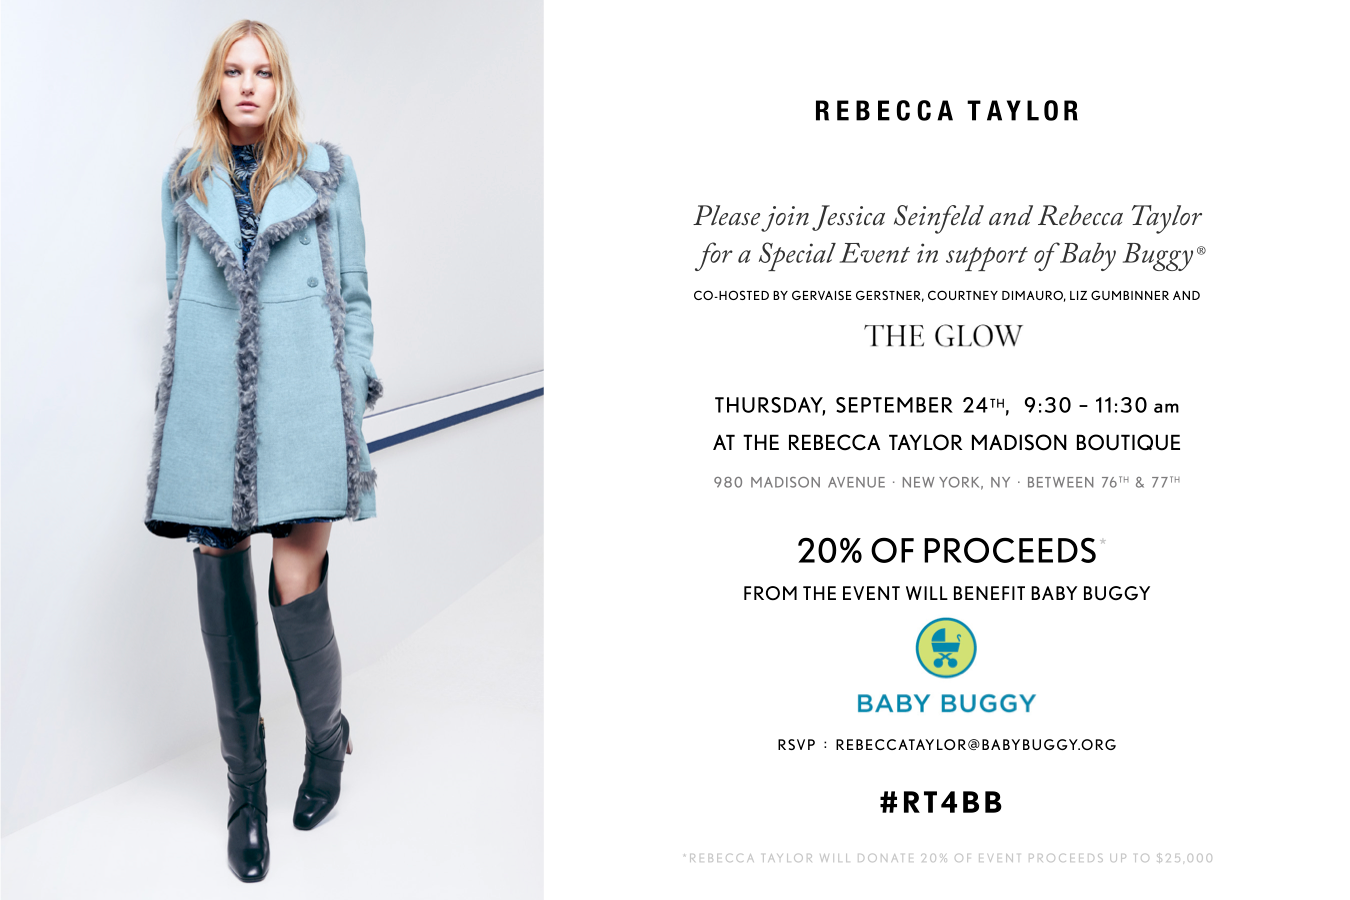 Rebecca Taylor shopping event to benefit Baby Buggy